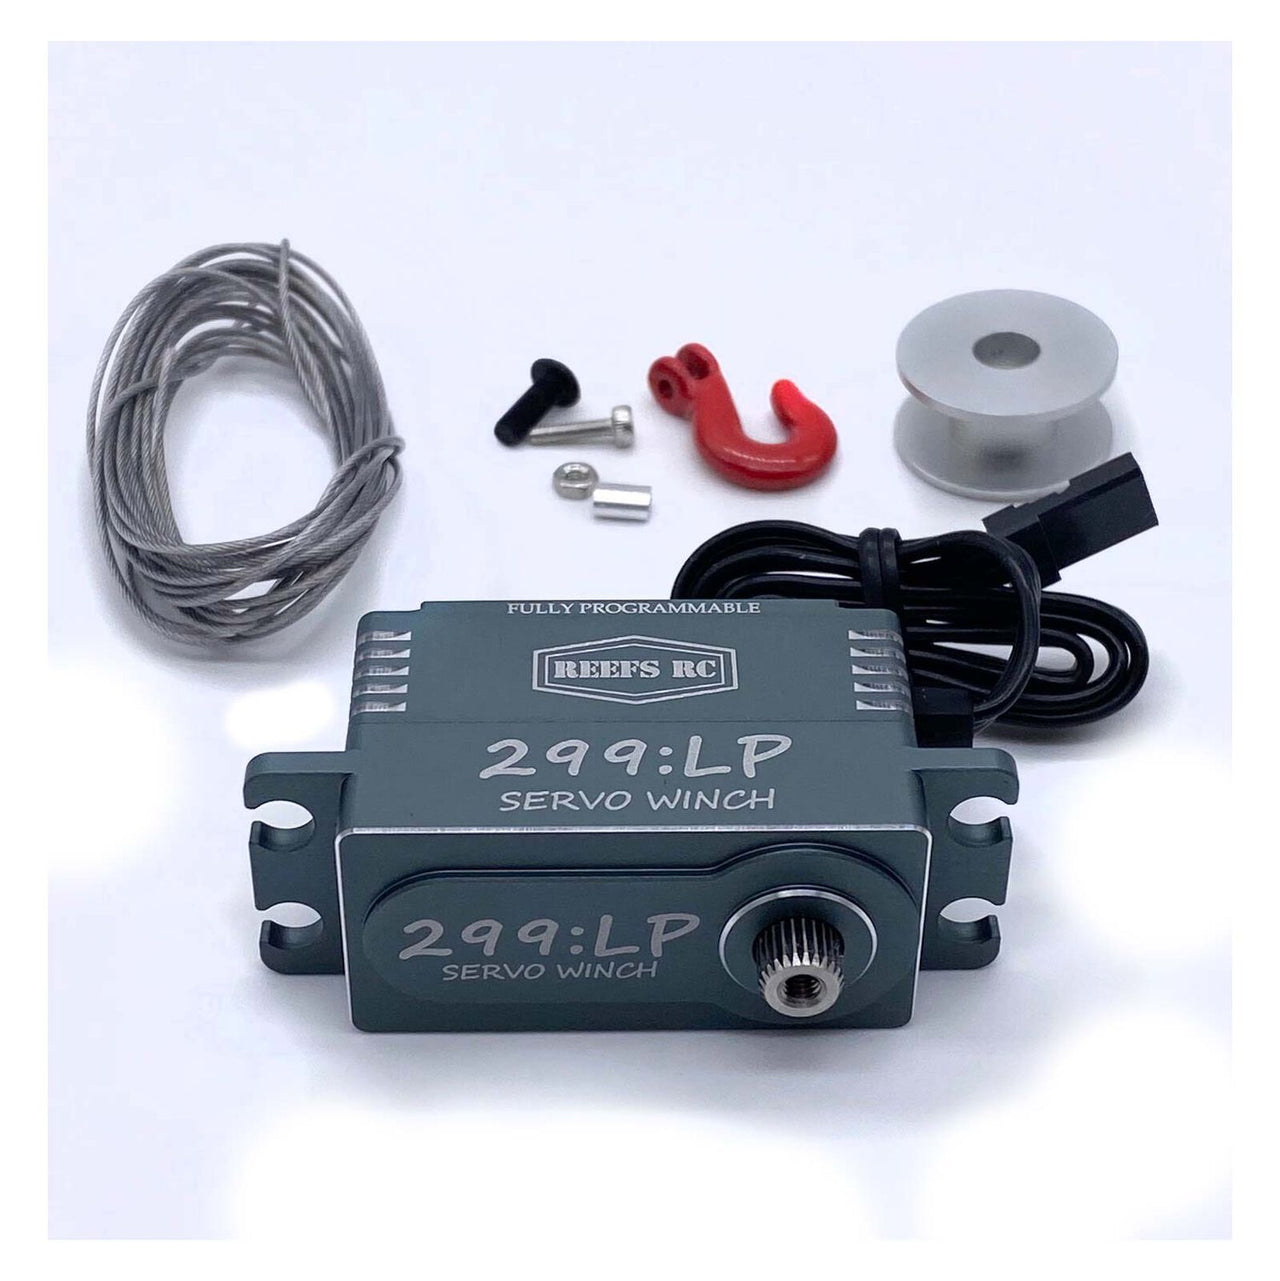 SEHREEFS59 299LP Servo Winch with Built in Controller